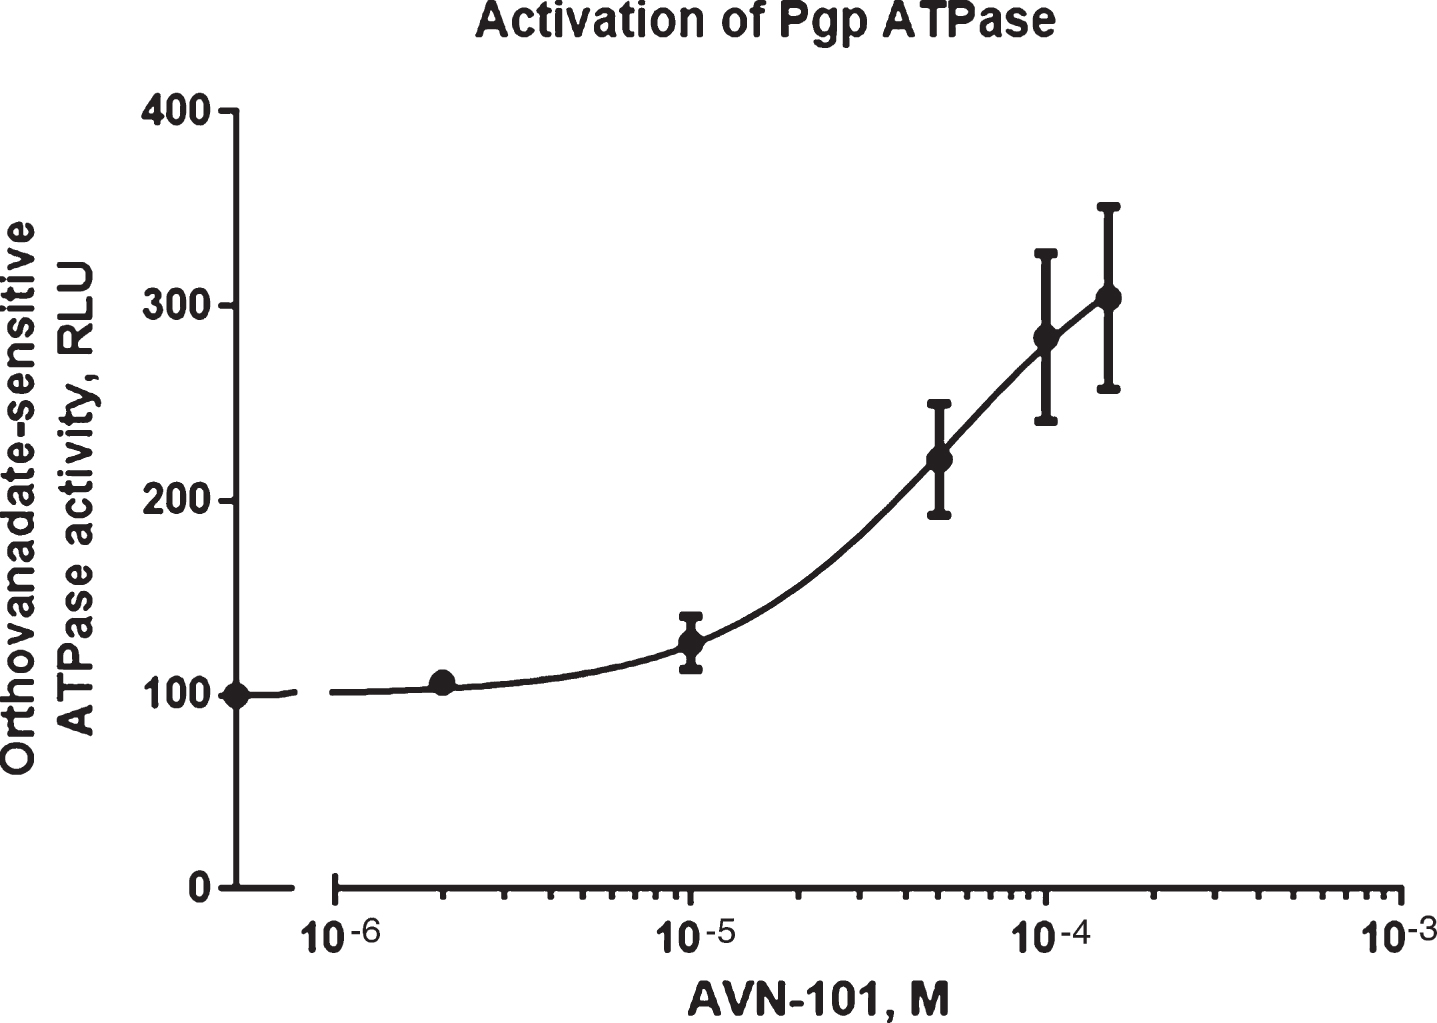 AVN-101-induced activation of Pgp ATPase activity.